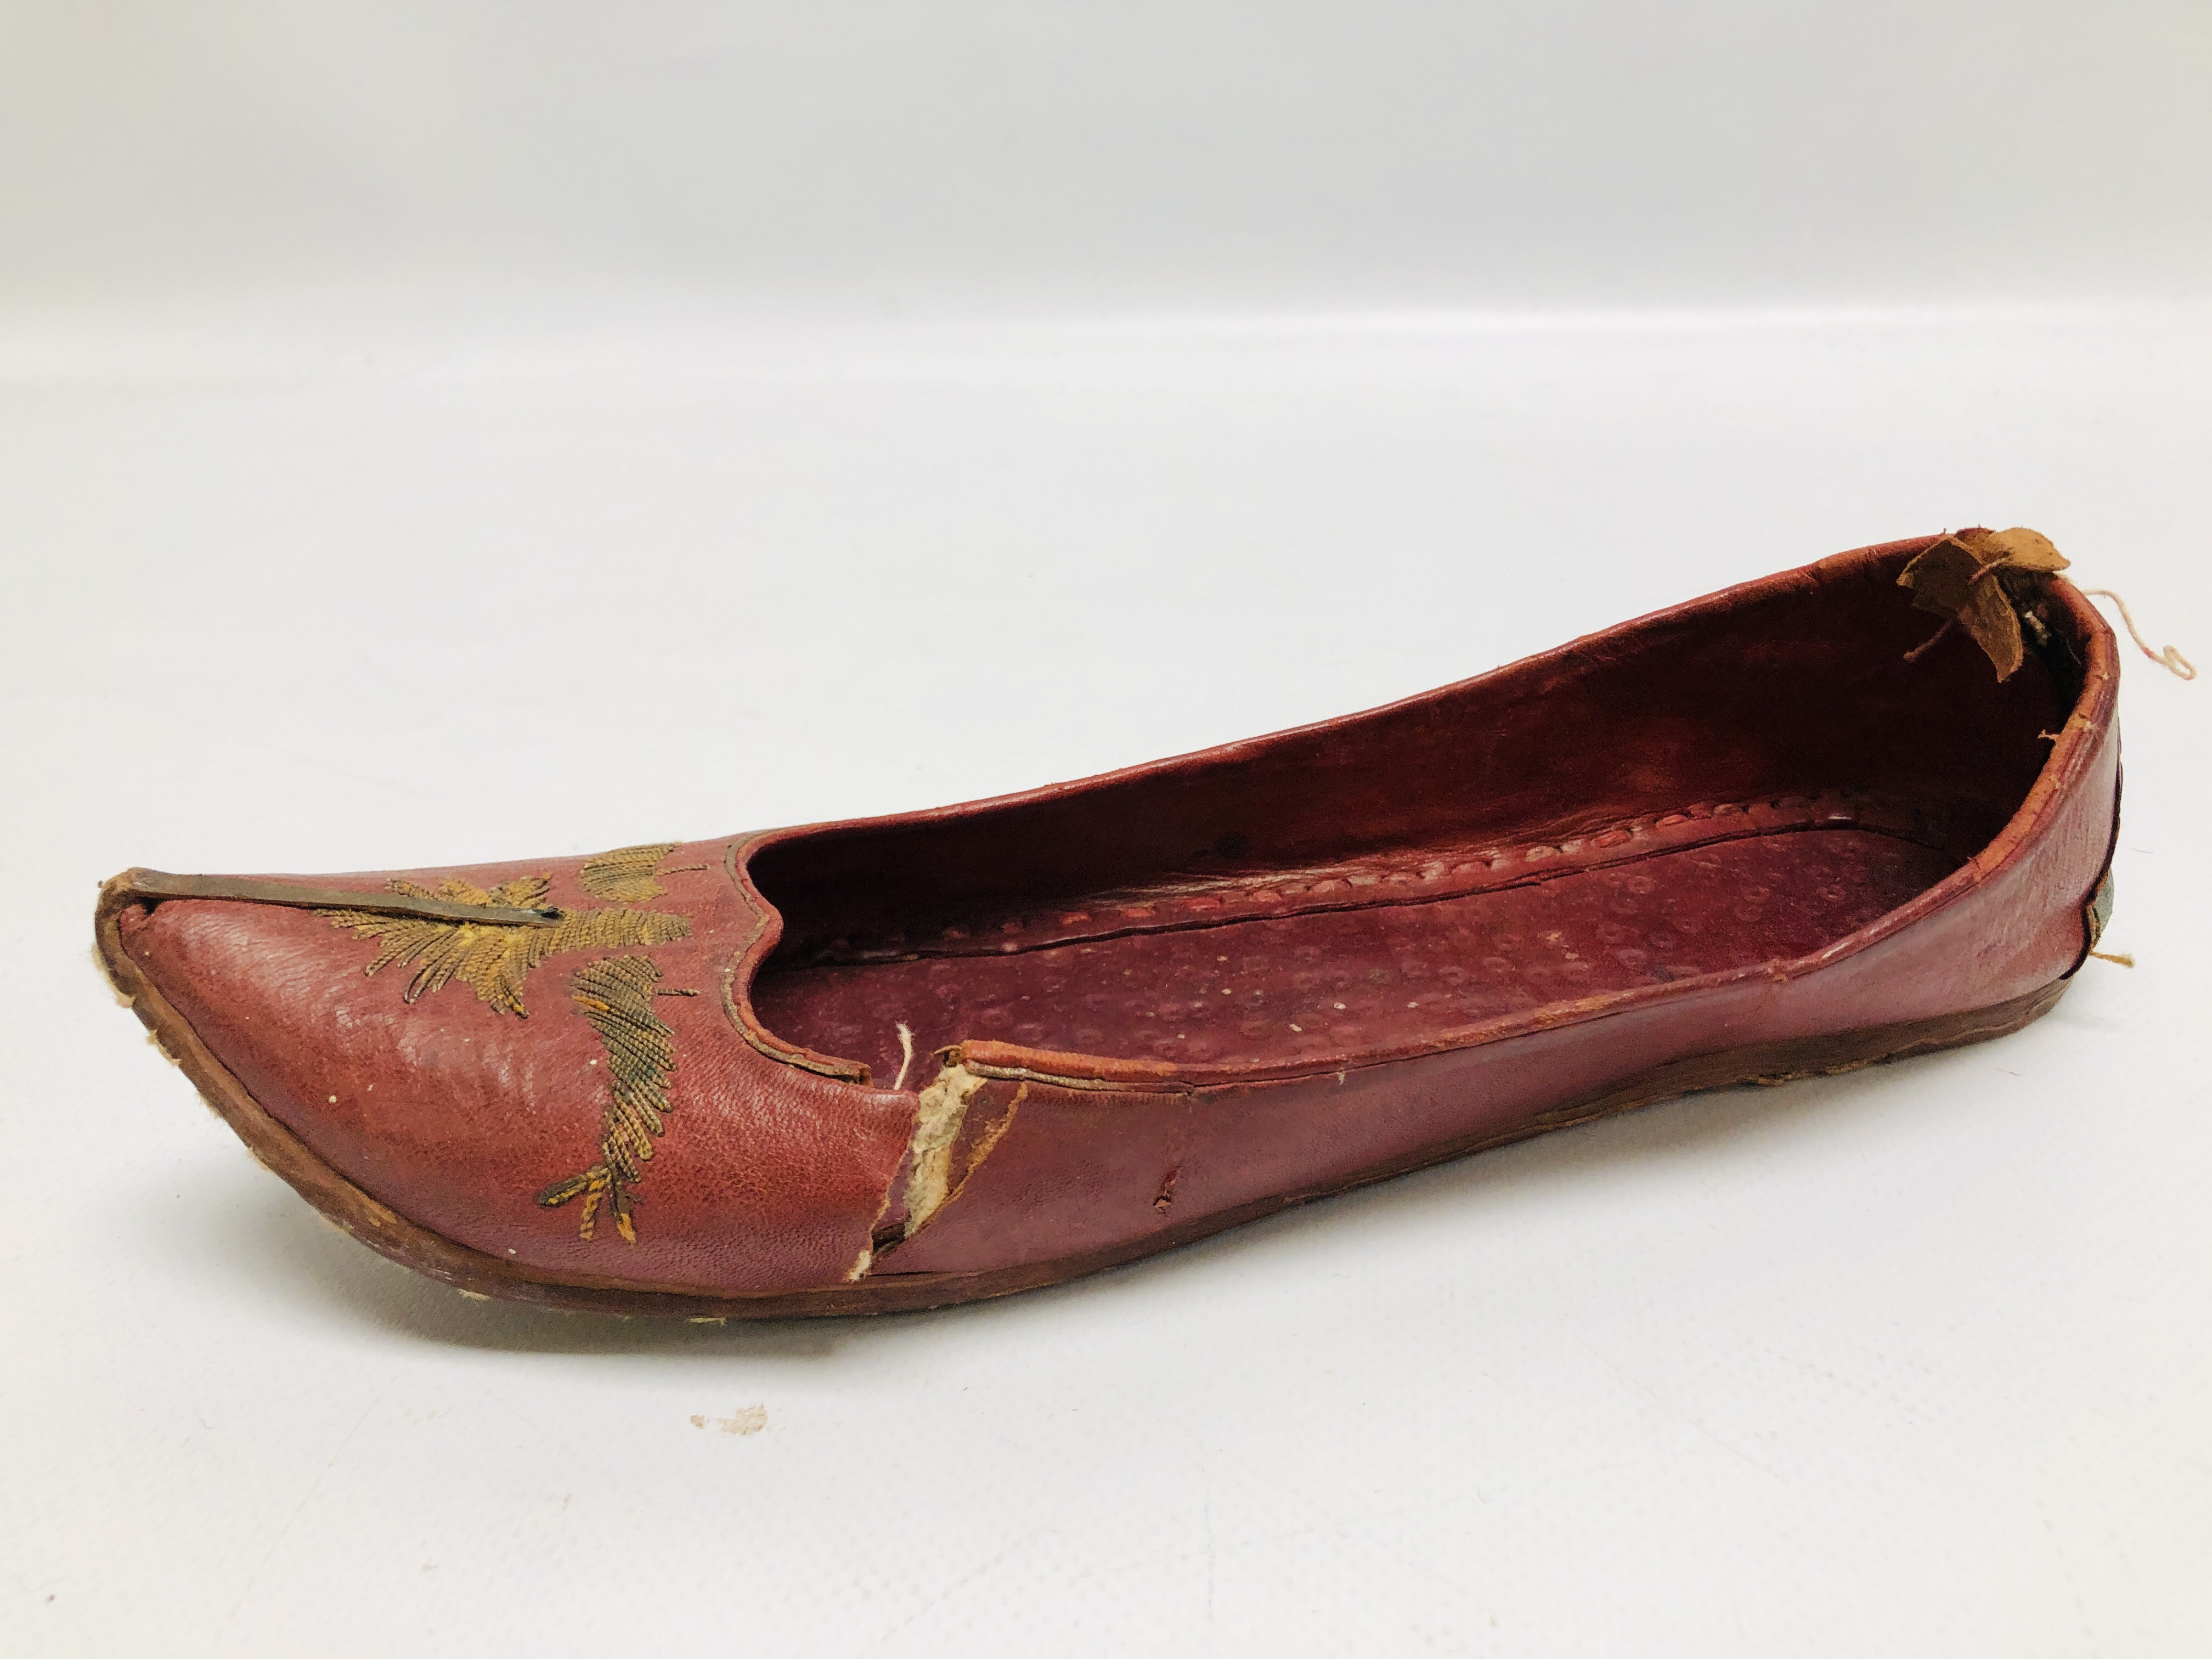 PAIR OF EARLY C20TH AFGHAN LEATHER SHOES WITH GOLD THREAD EMBROIDERY. - Image 3 of 10